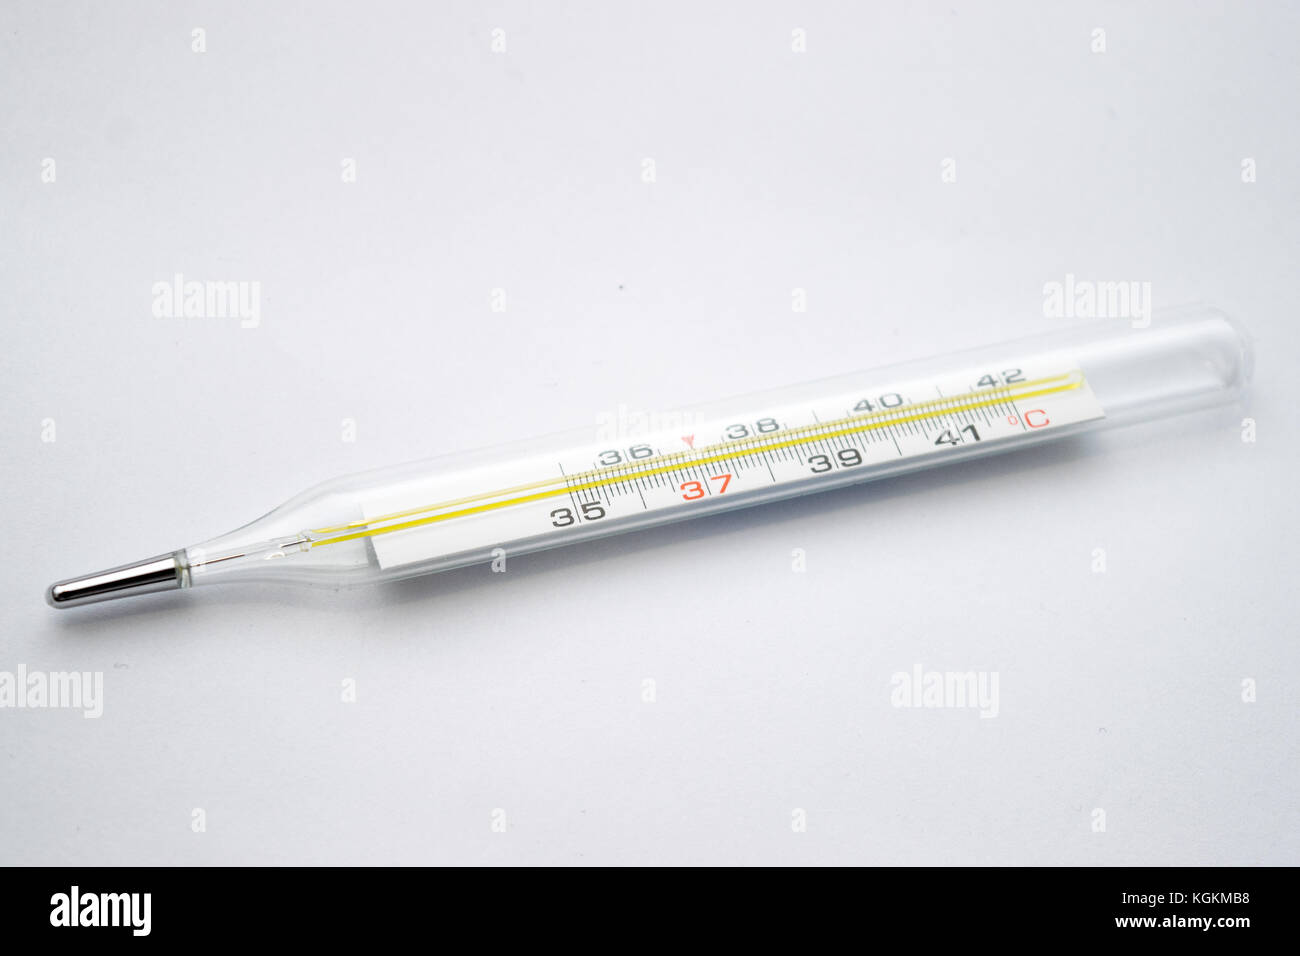 https://c8.alamy.com/comp/KGKMB8/glass-mercury-thermometer-for-measuring-the-temperature-of-the-human-KGKMB8.jpg